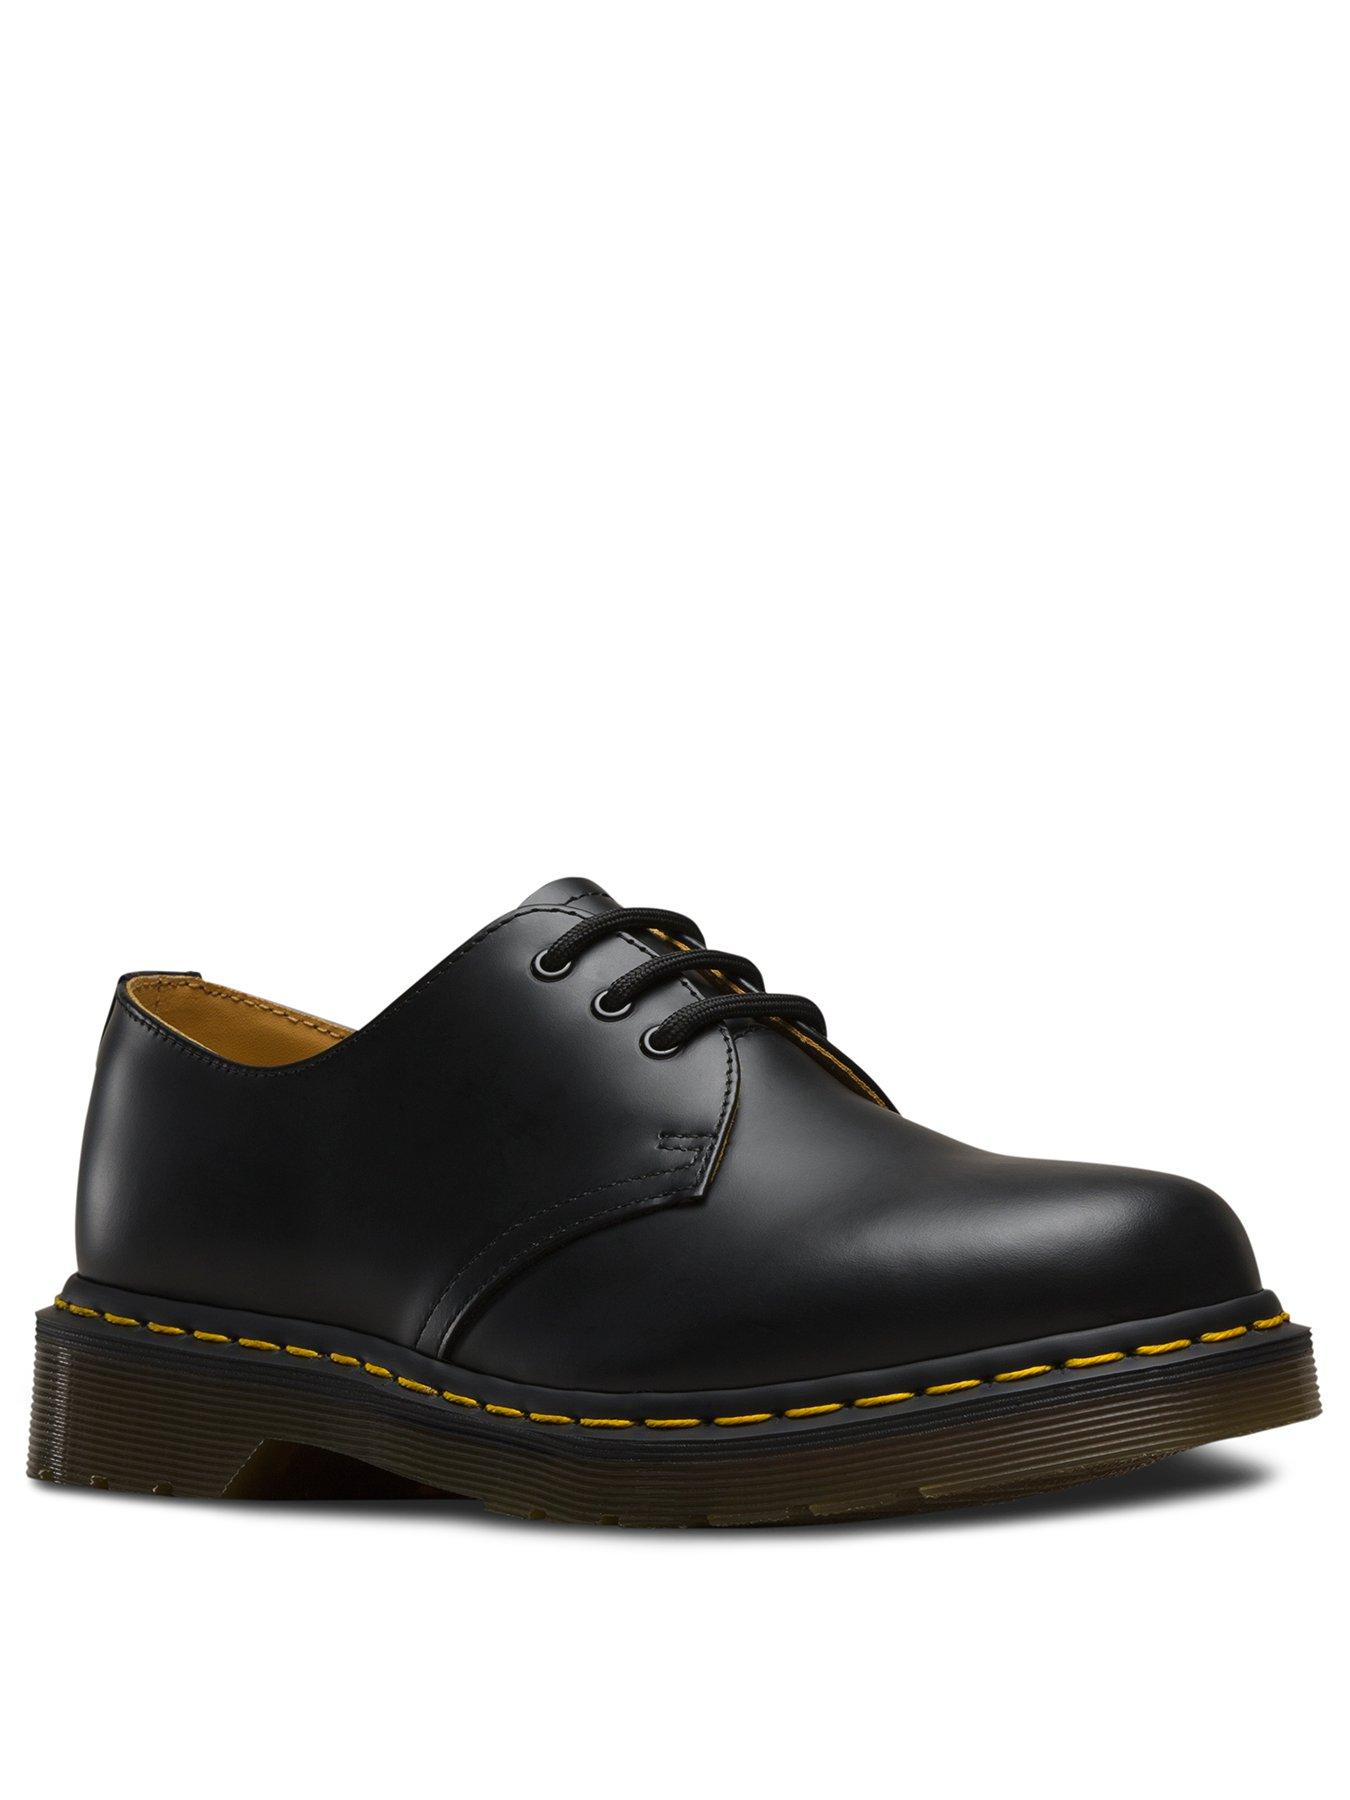 dr martens buy now pay later